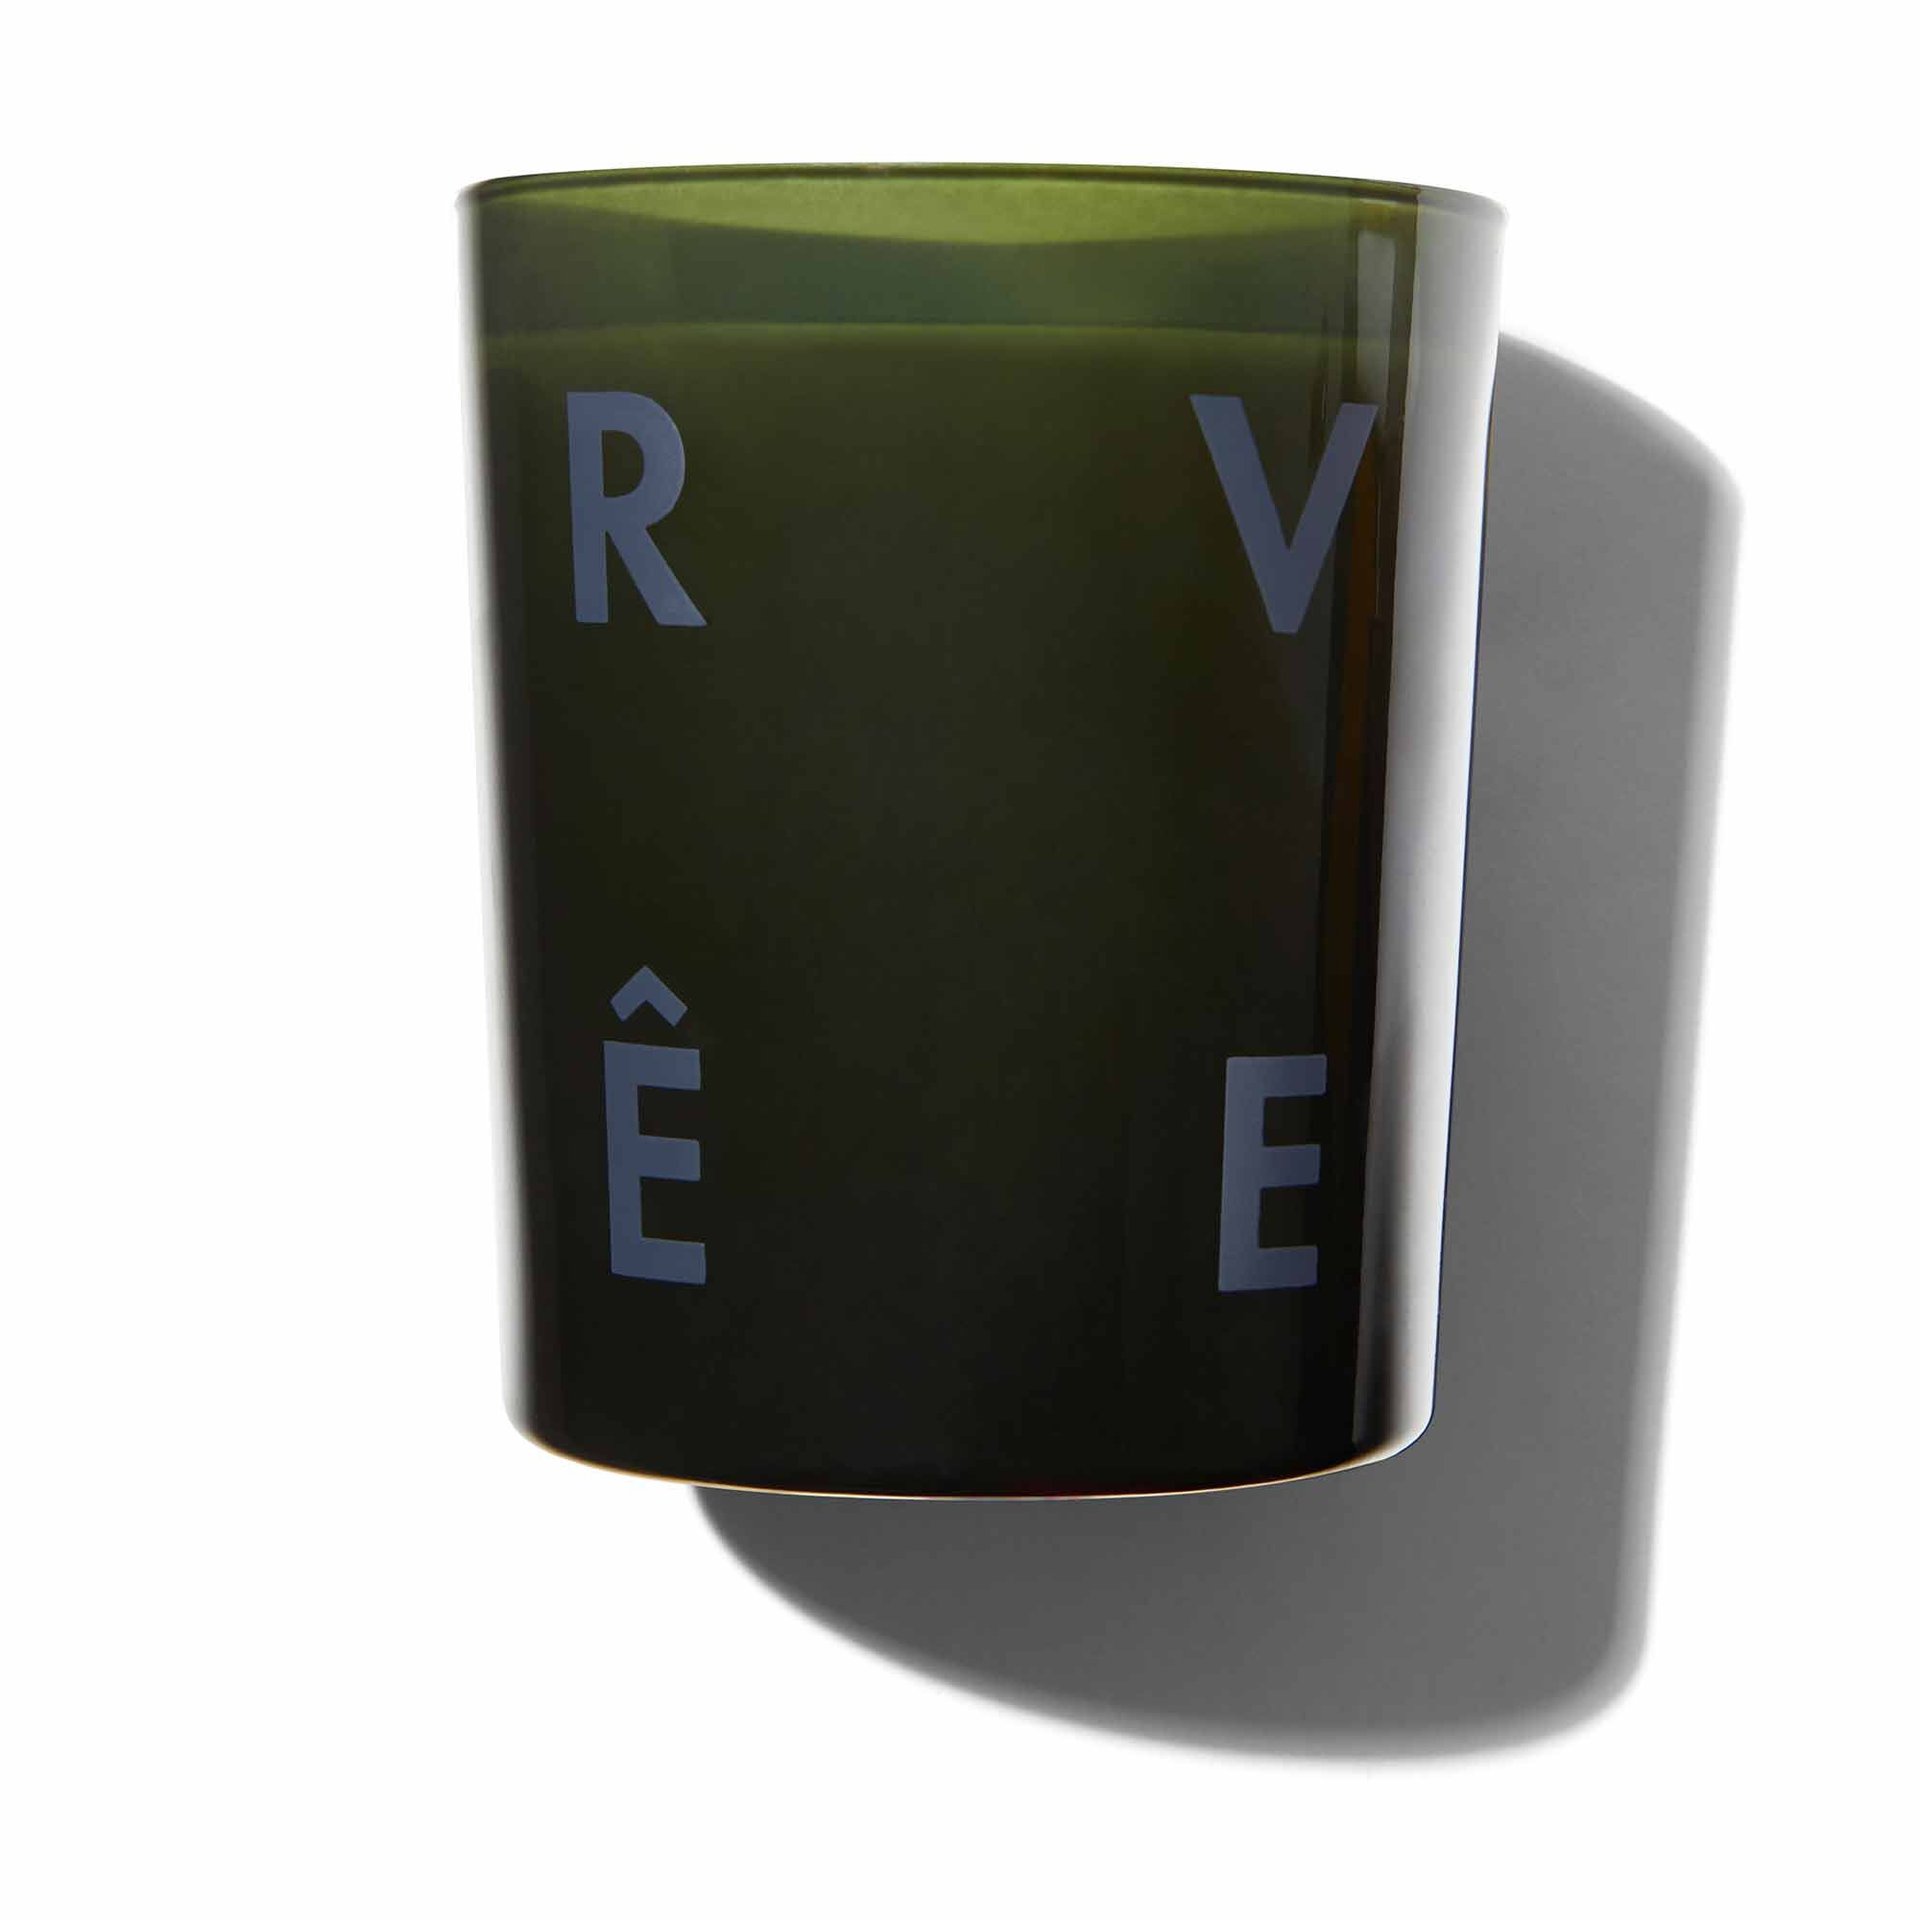 Reves D'eze Luxury Scented Candle